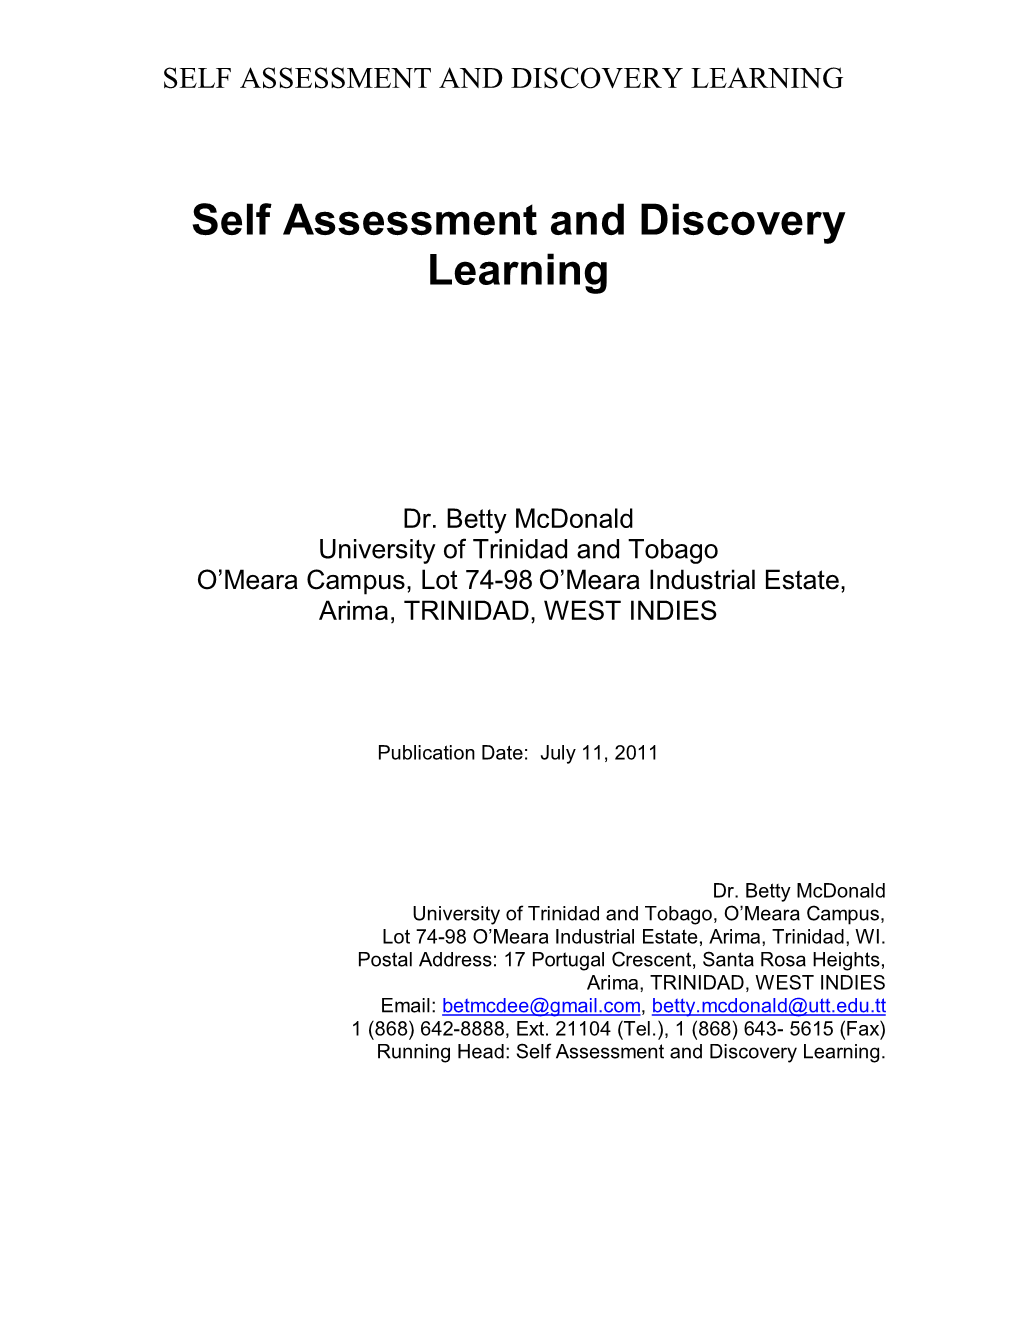 Self Assessment and Discovery Learning